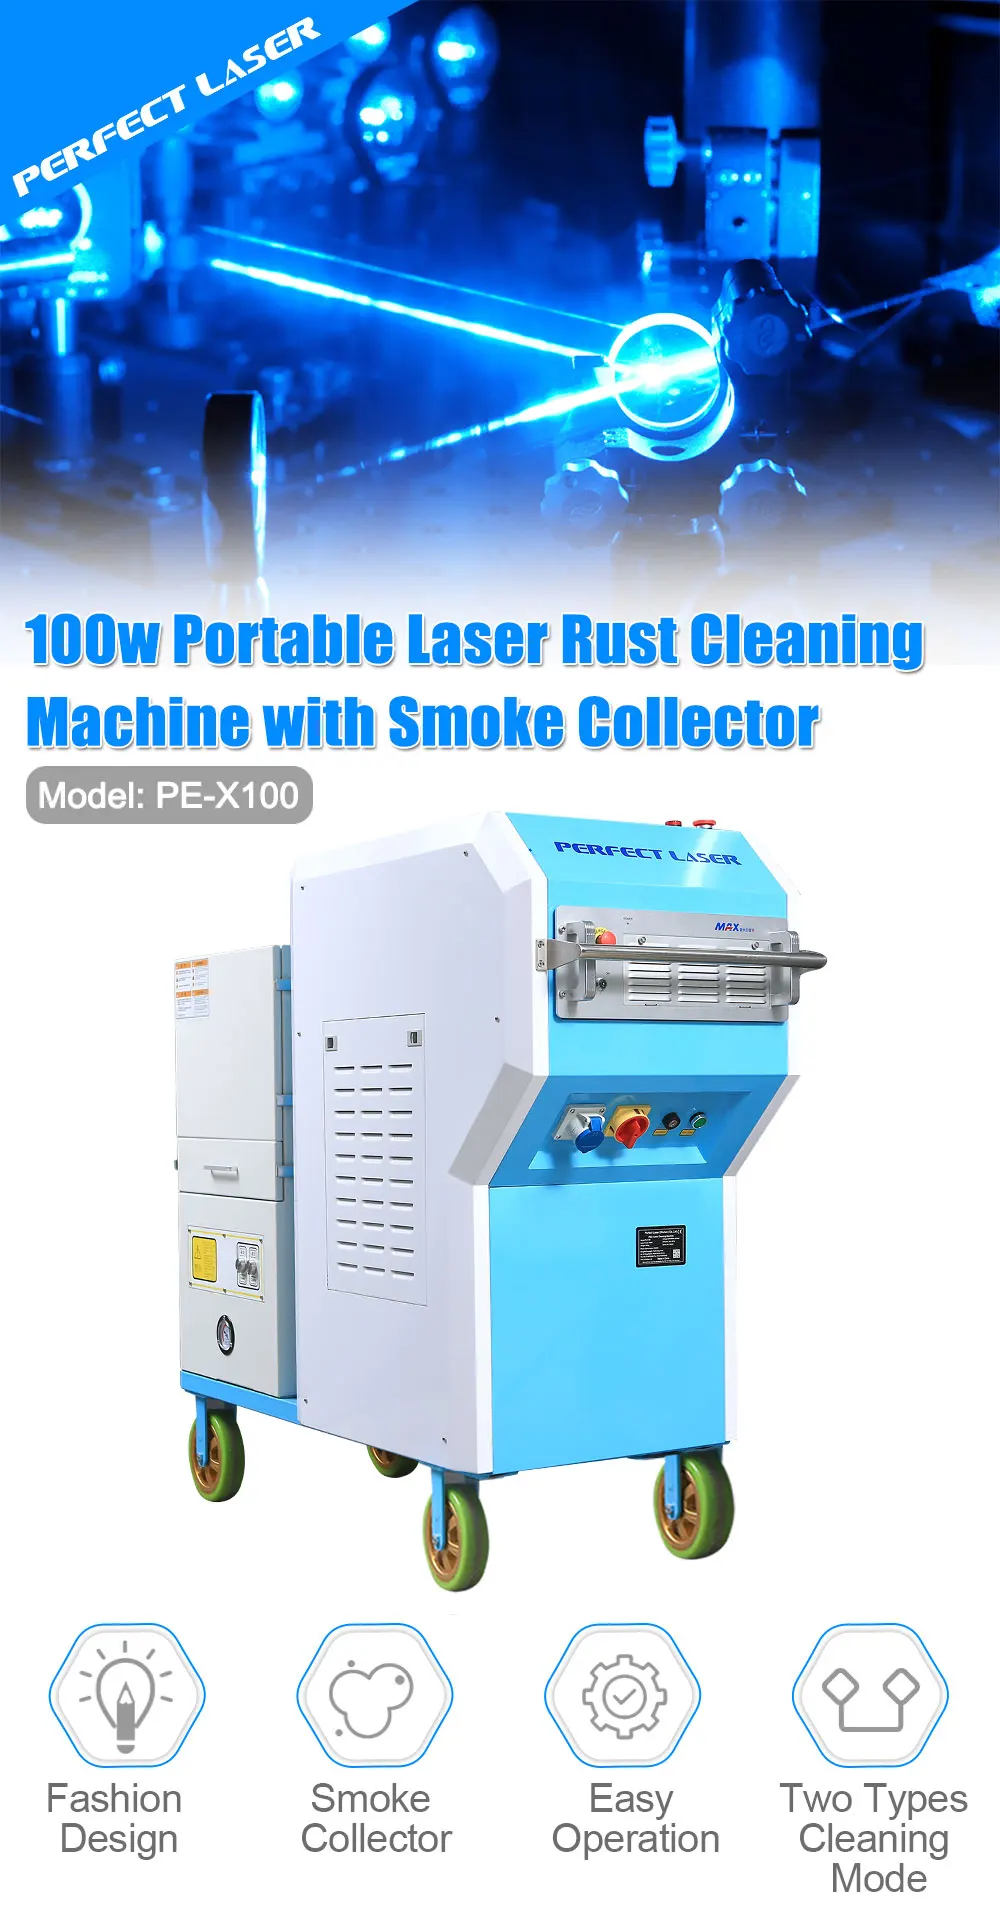 Laser machine for cleaning and rust фото 73